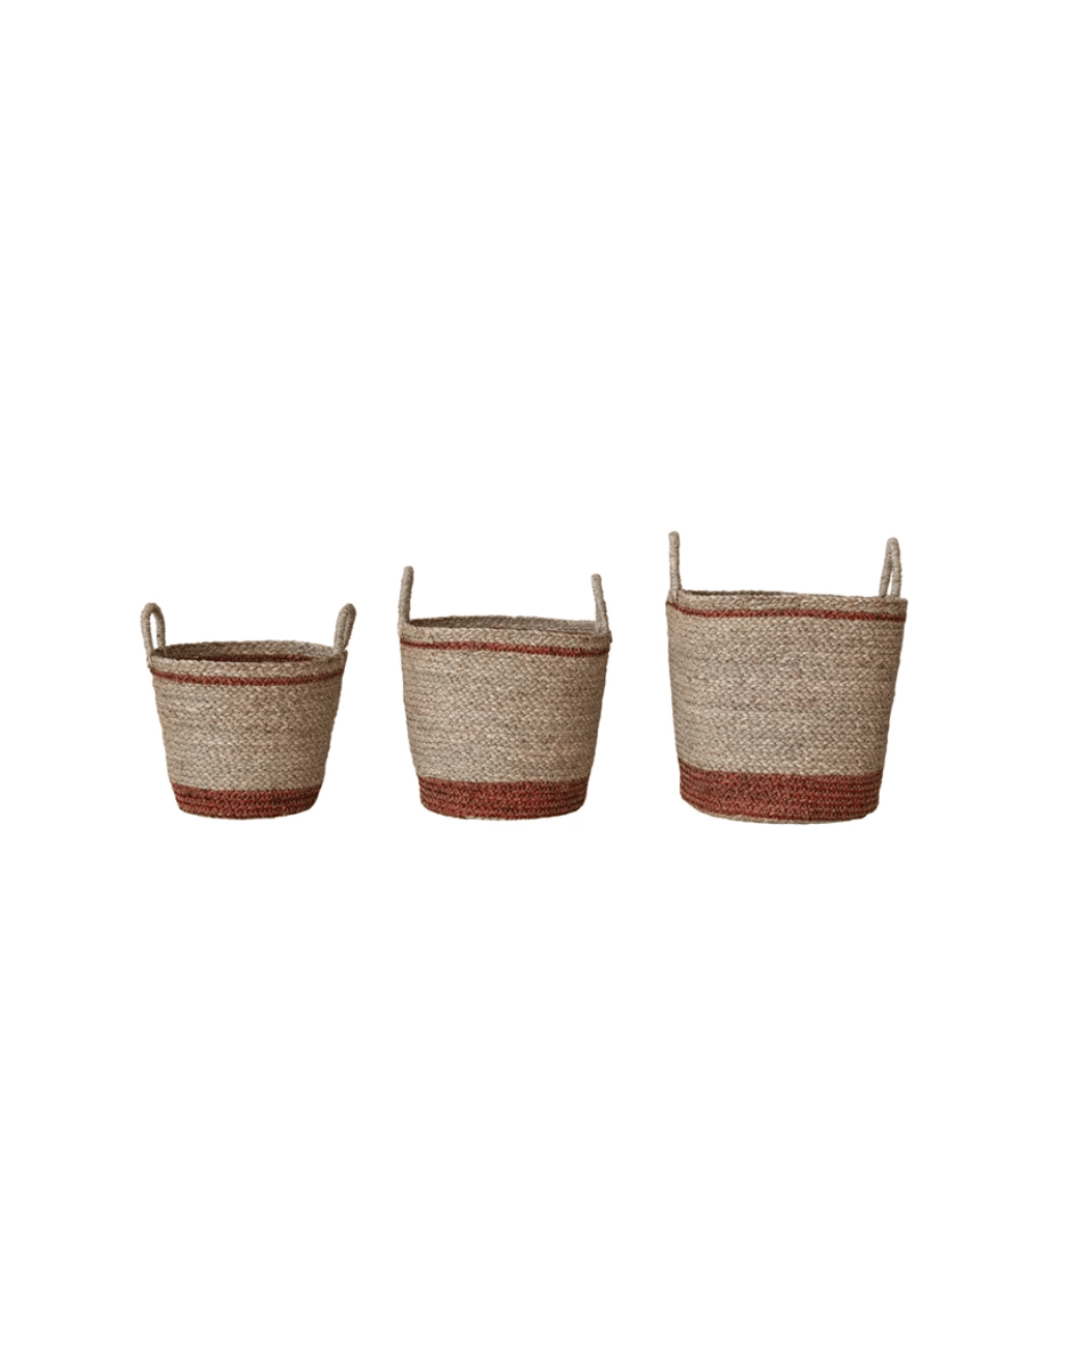 Three Seagrass Baskets with Brown Stripe &amp; Handles by Creative Co-op, in different sizes, lined up and featuring brown and natural hues, each styled in a bungalow theme against a white background.